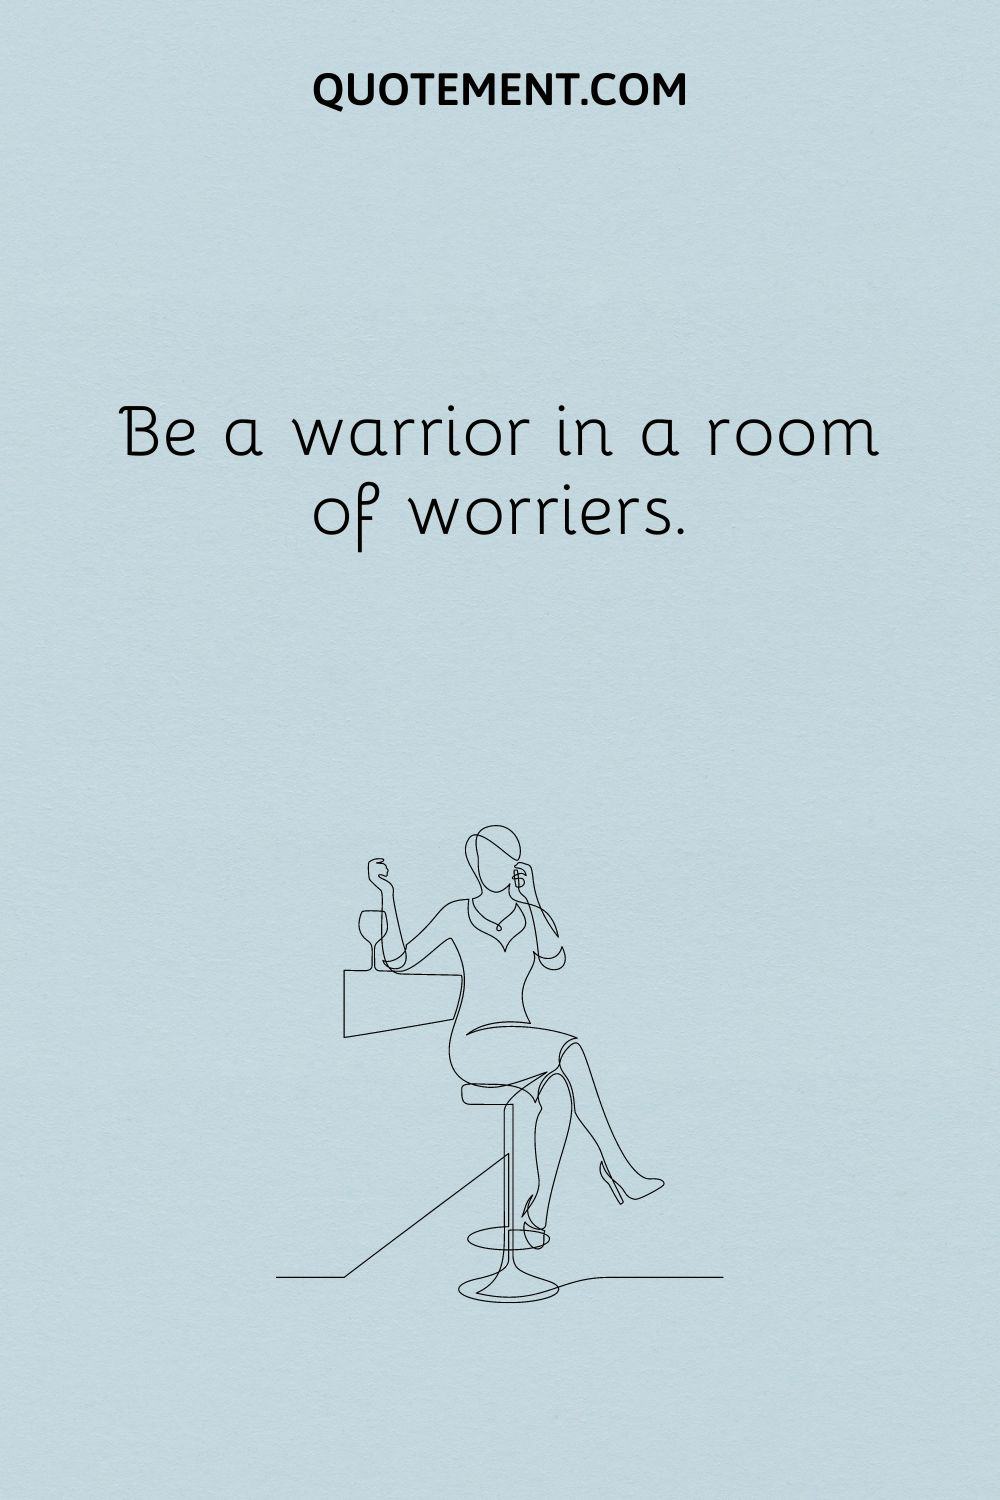 Be a warrior in a room of worriers.